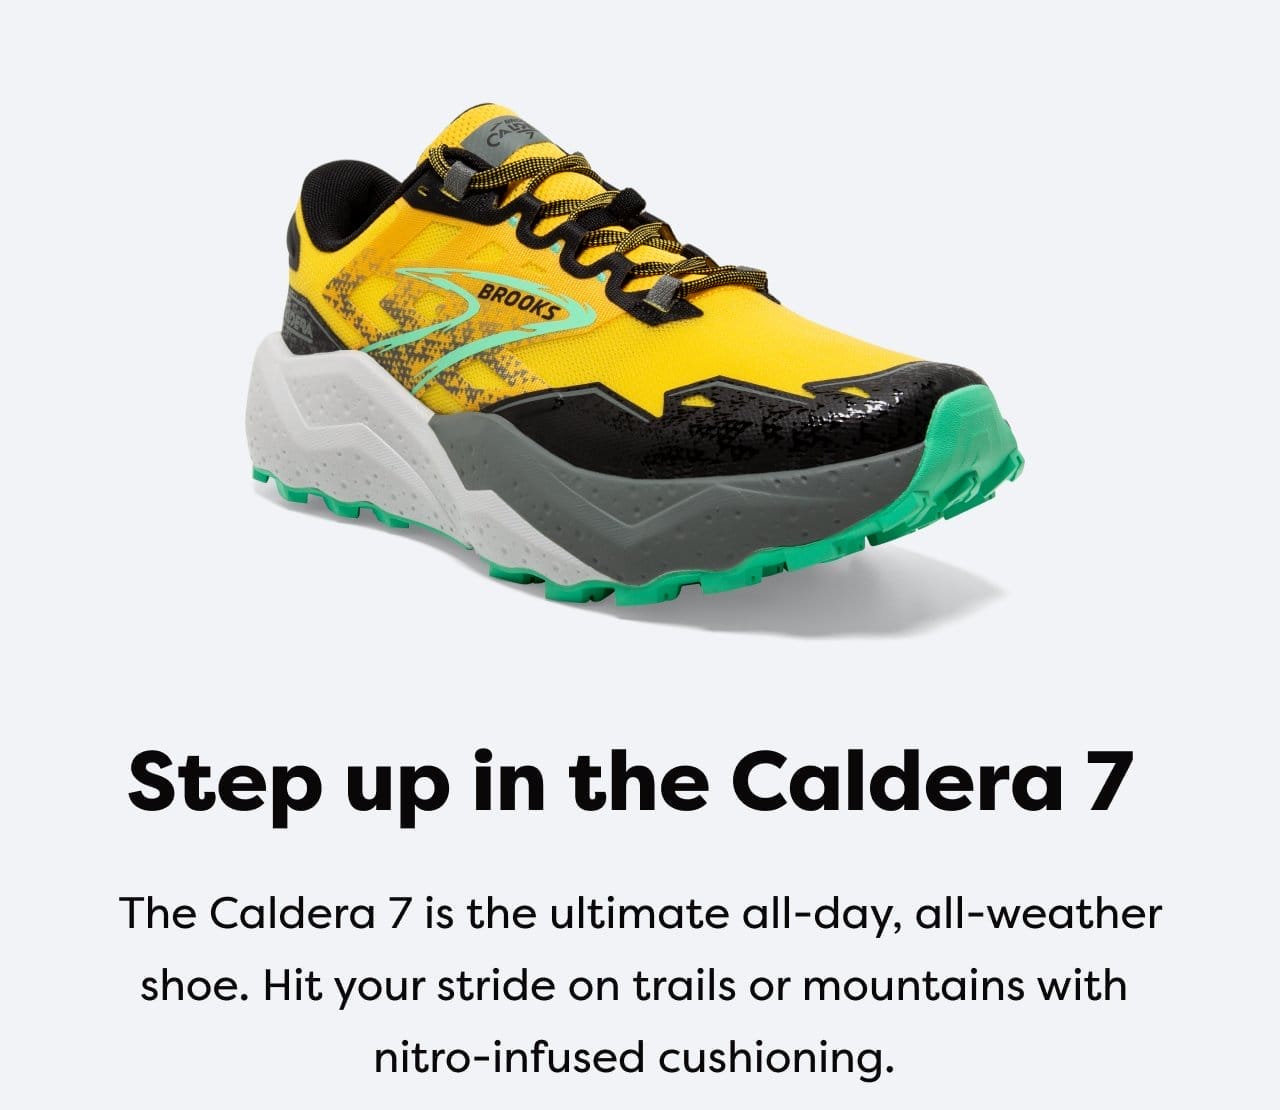 Step up in the Caldera 7 - The Caldera 7 is the ultimate all-day, all-weather shoe. Hit your stride on trails or mountains with nitro-infused cushioning.